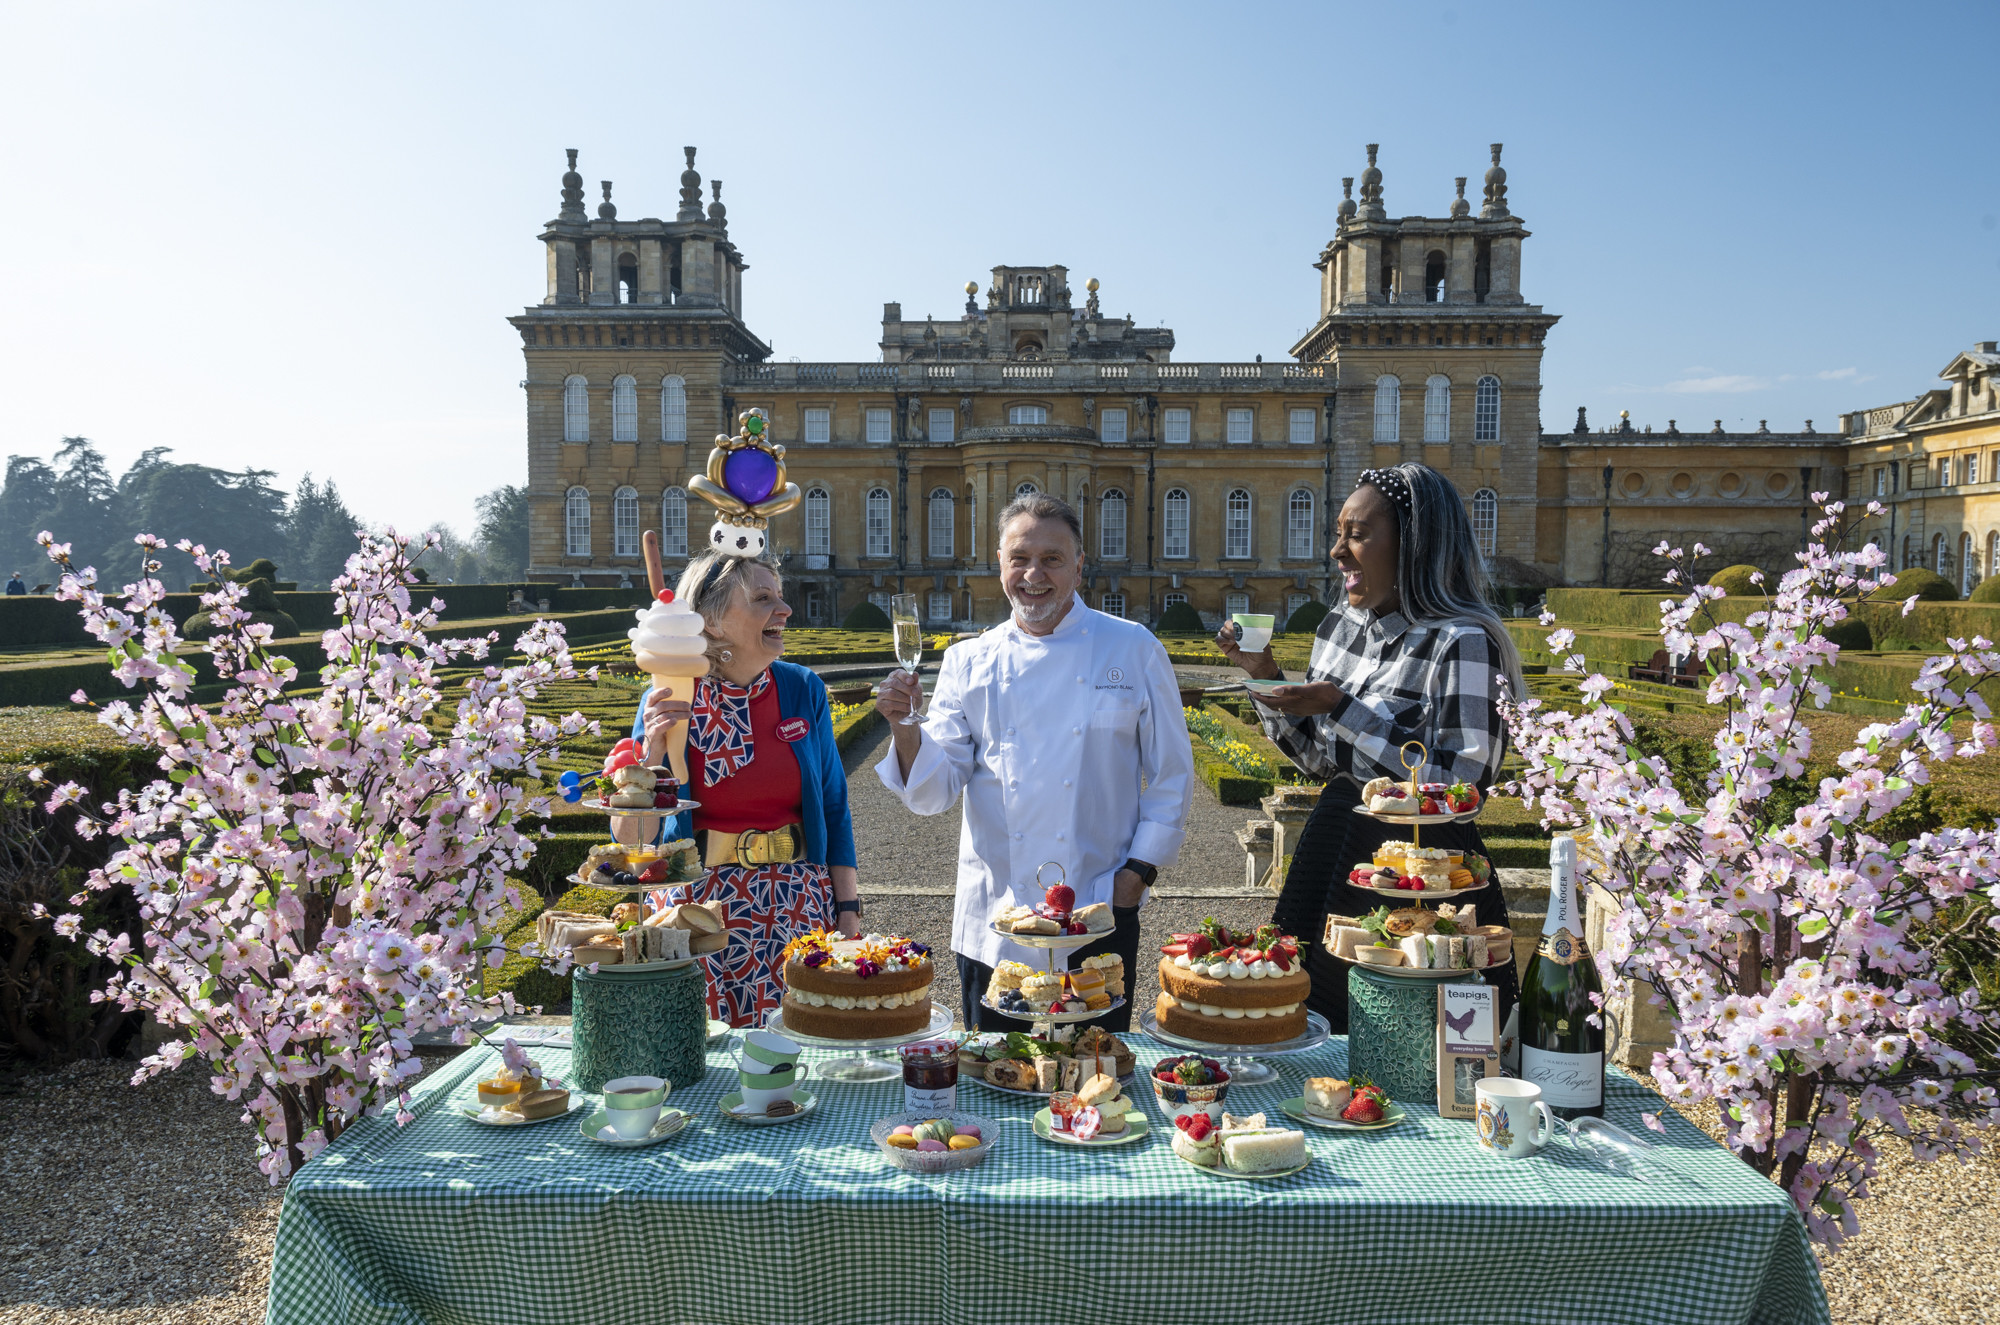 Chef and two guests stood at a display table in front of Blenheim Palace, with food and cakes on the table in front of them